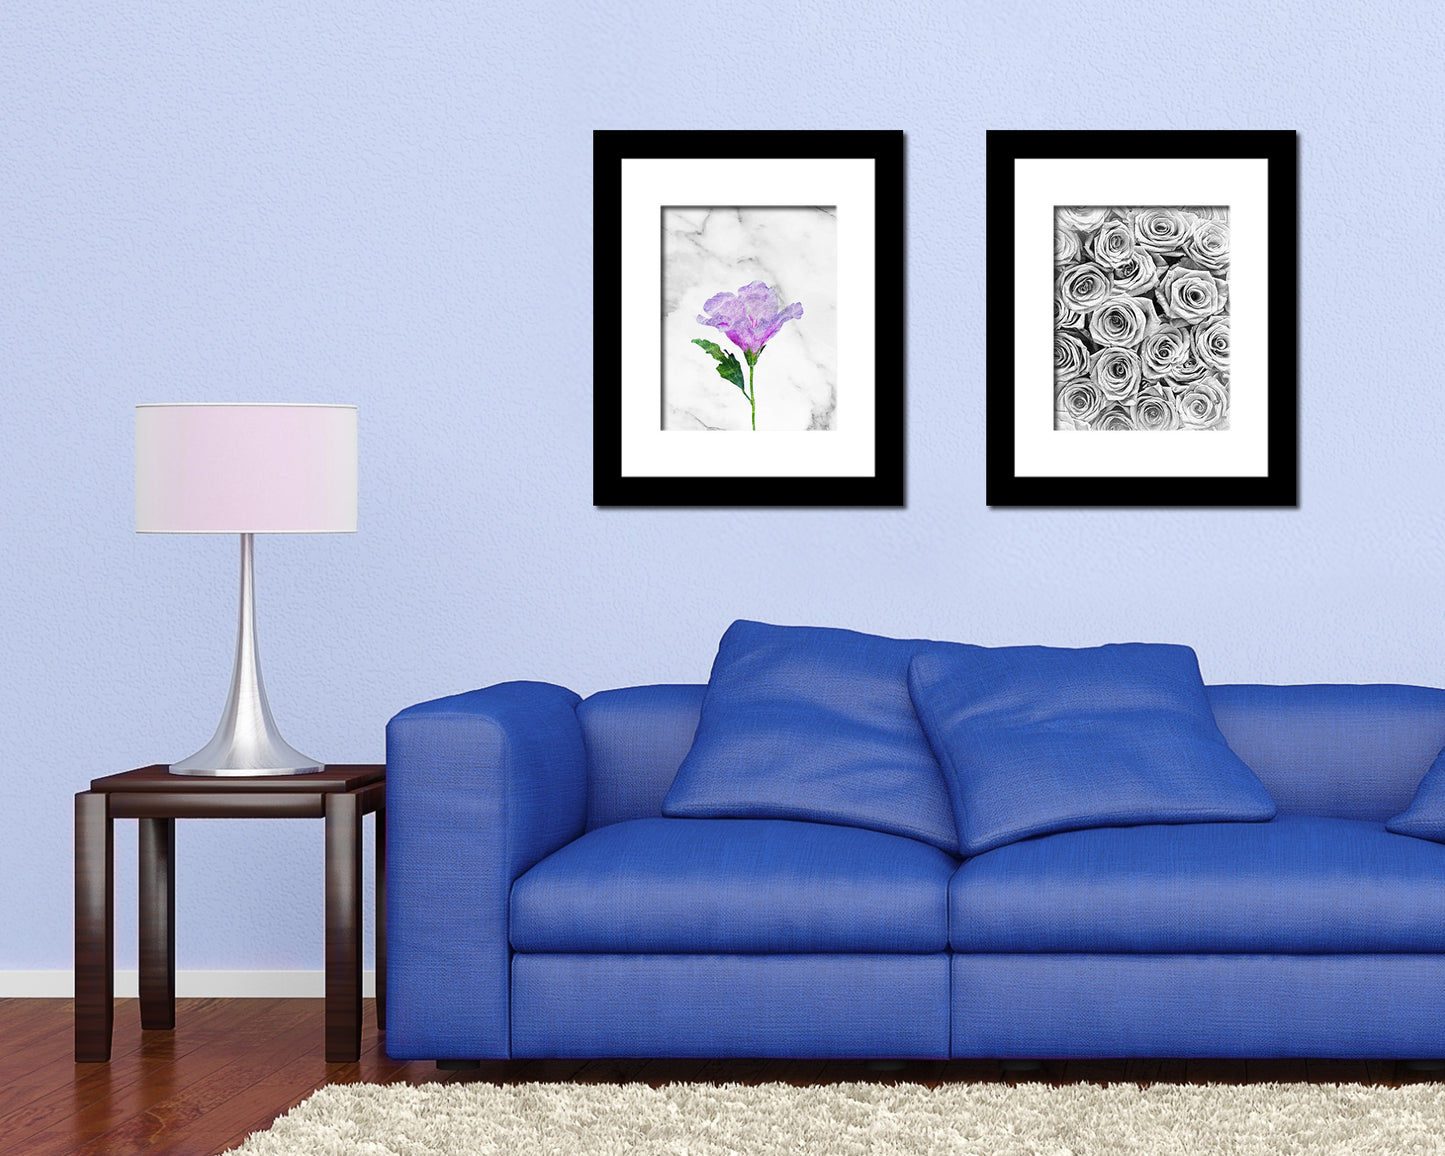 Mauve Hibiscus Rosa Marble Texture Plants Art Wood Framed Print Wall Decor Gifts